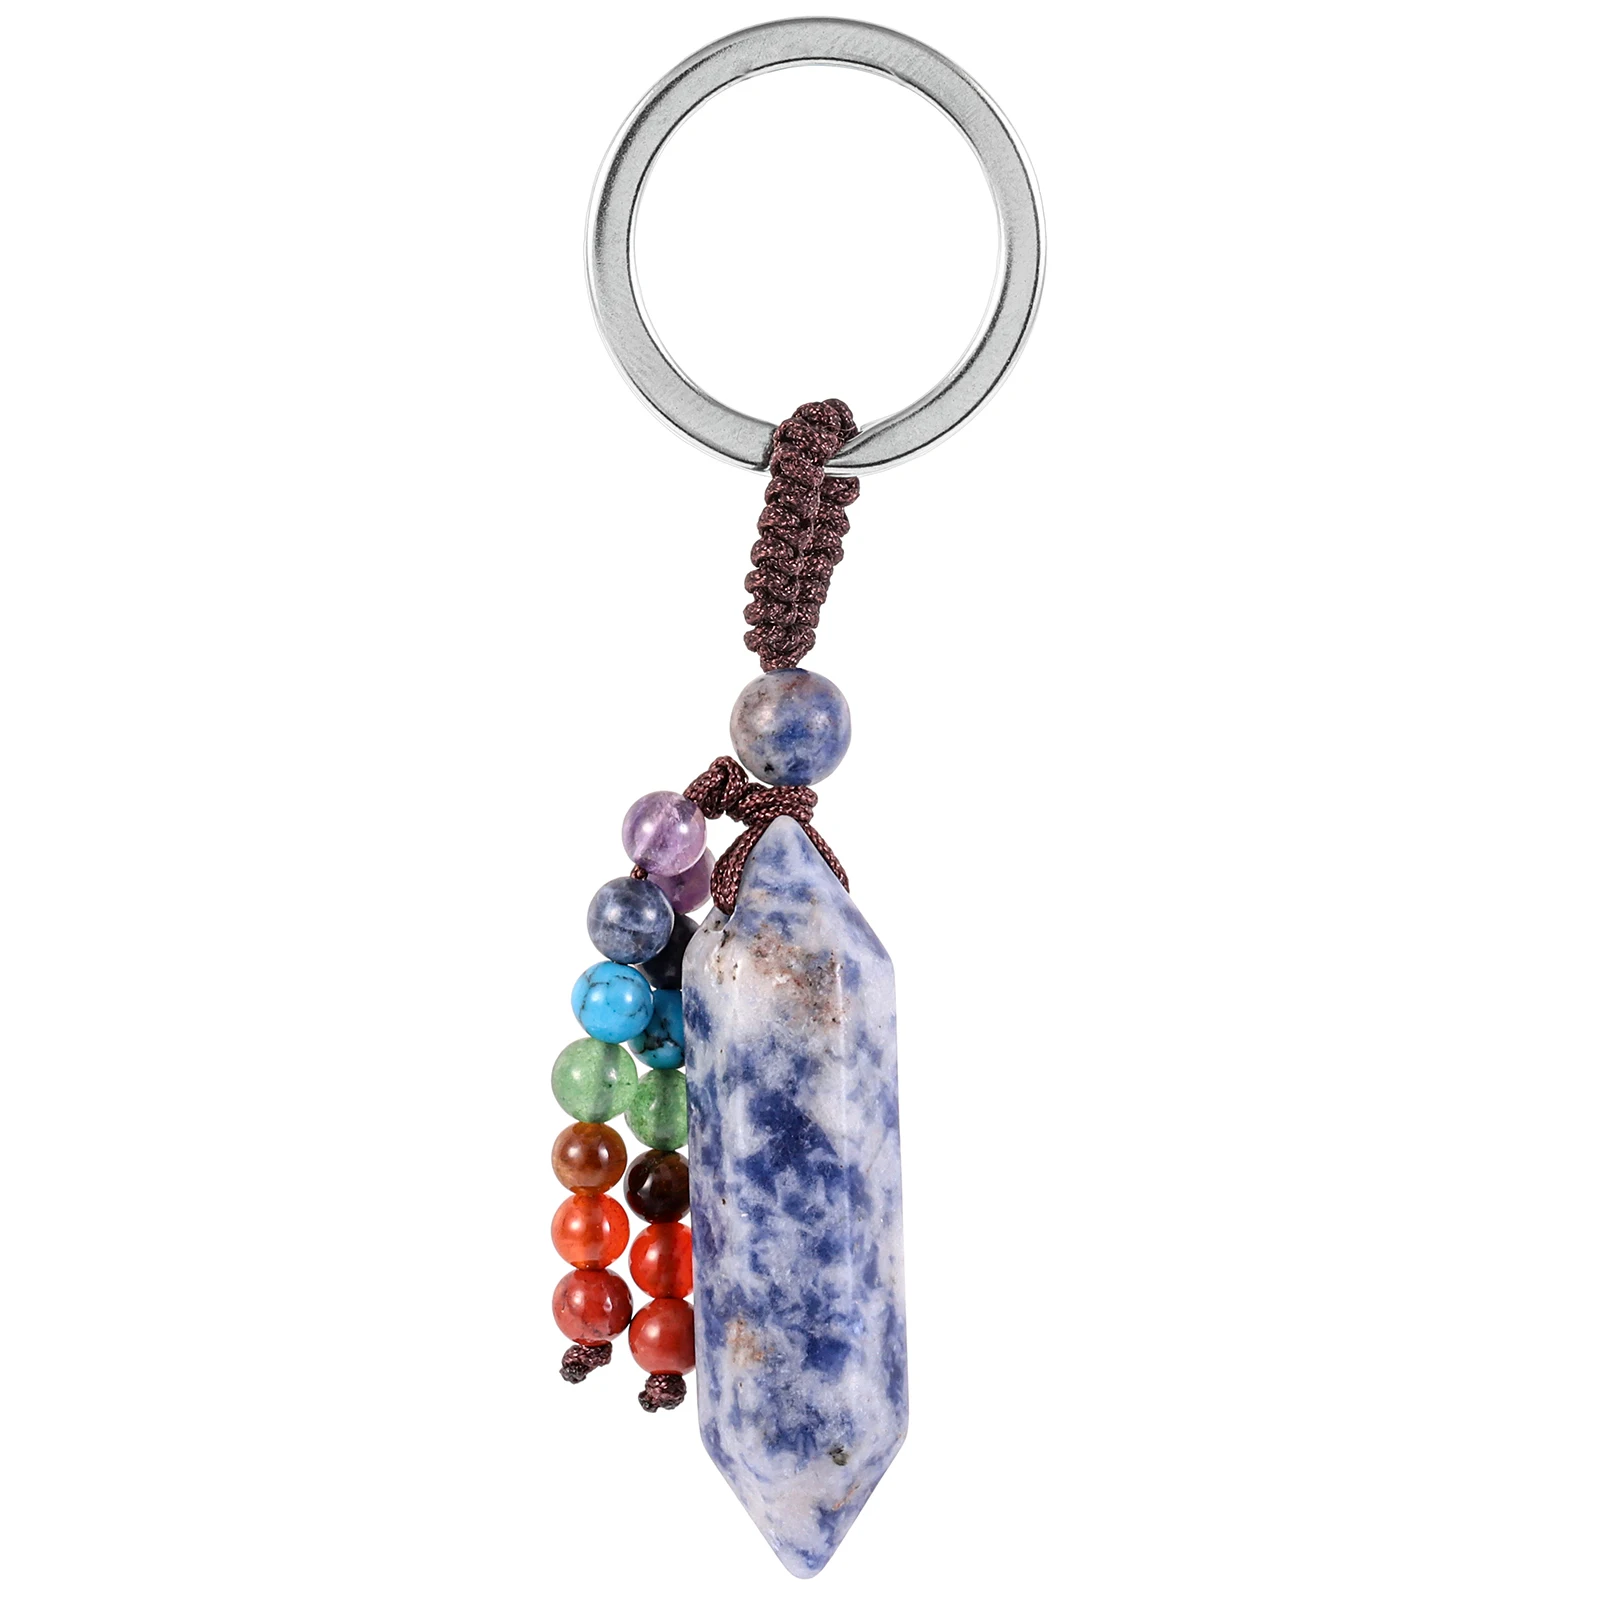 

Natural Crystal Hexagonal Point Wand Keychains Healing 7 Chakra Stone Beads Pendant Metal Keyring Lanyards Jewelry Accessories